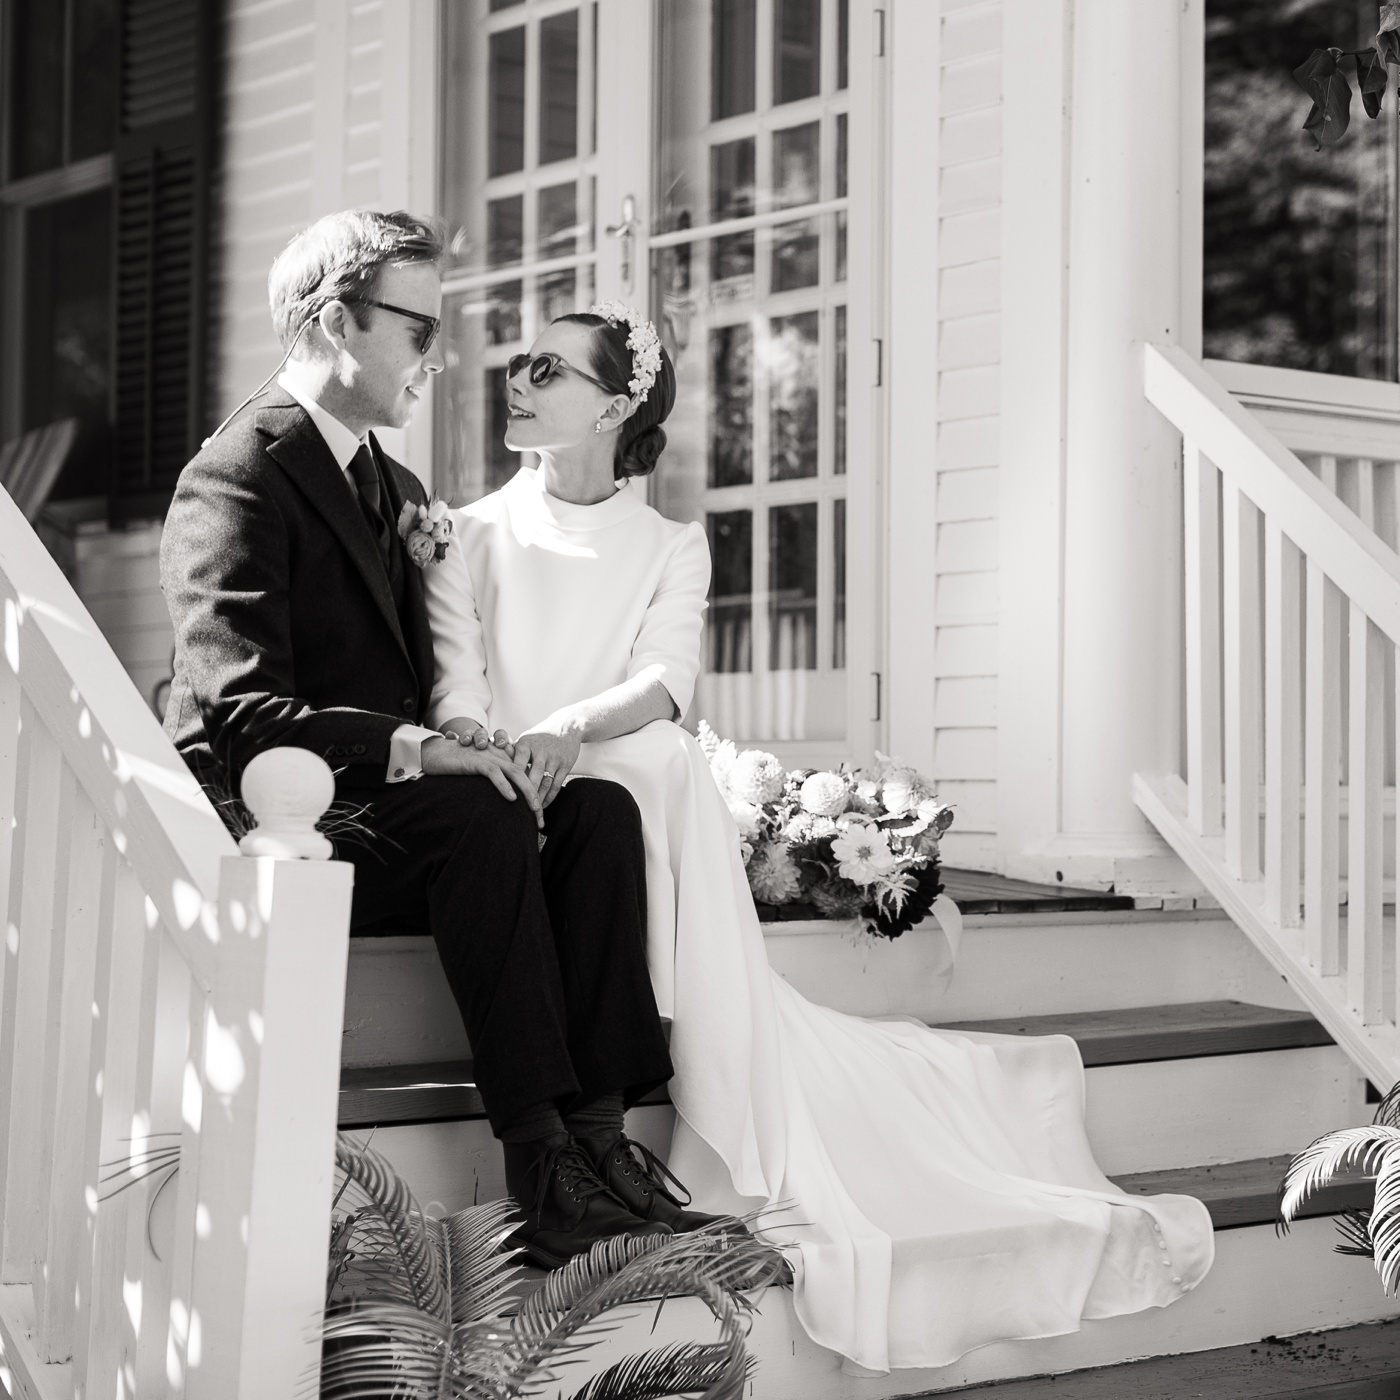 Bridal portraits at a private residence in Sugar Hill, NH